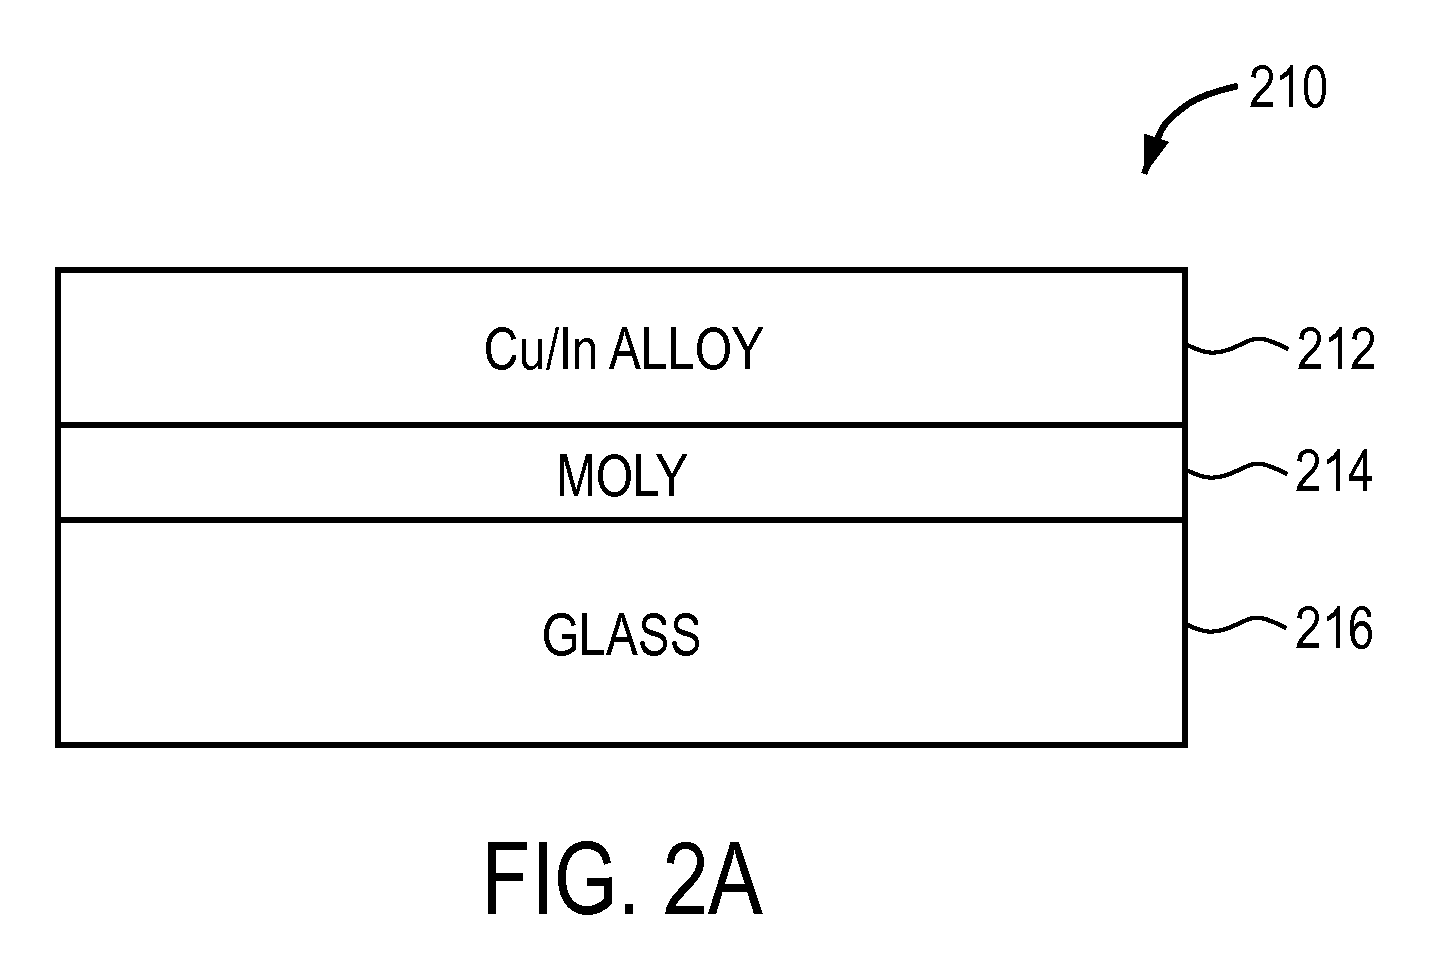 Thermal management and method for large scale processing of CIS and/or CIGS based thin films overlying glass substrates